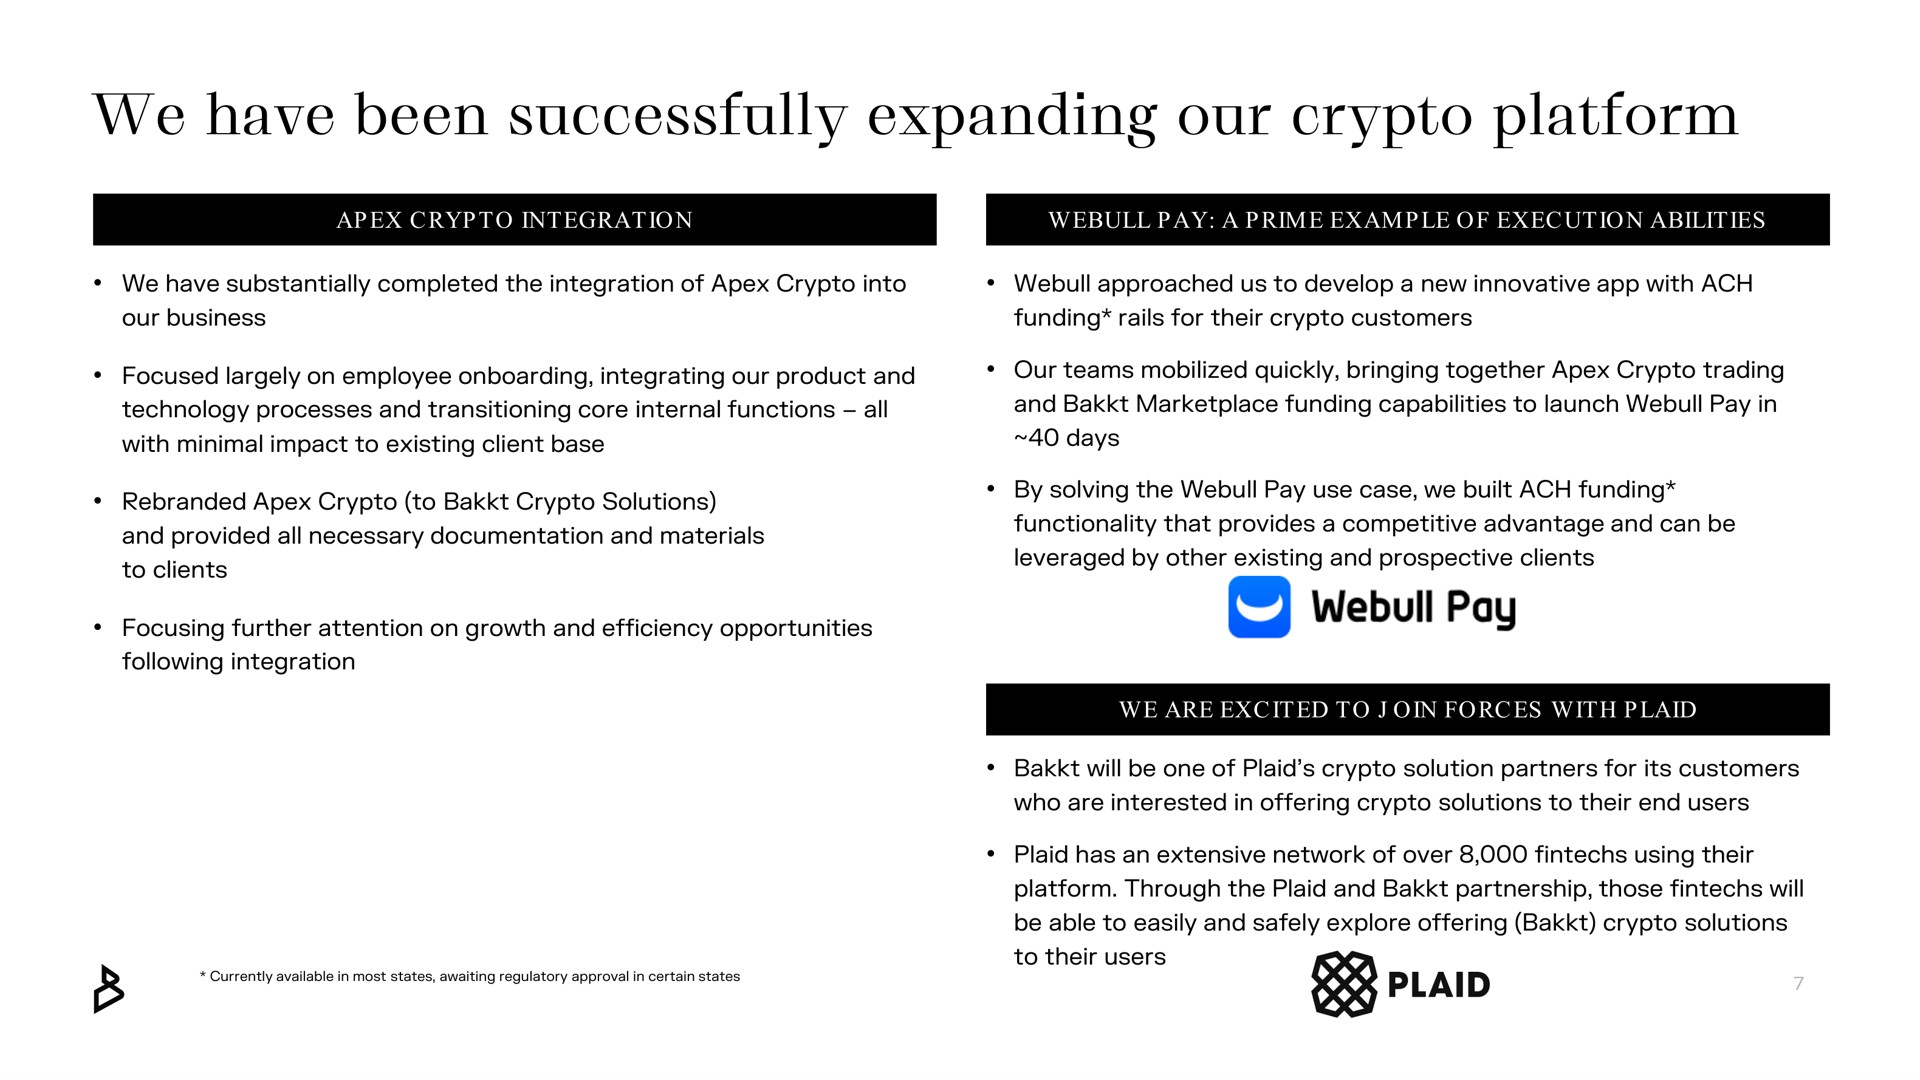 we have been successfully expanding our platform pay | Bakkt